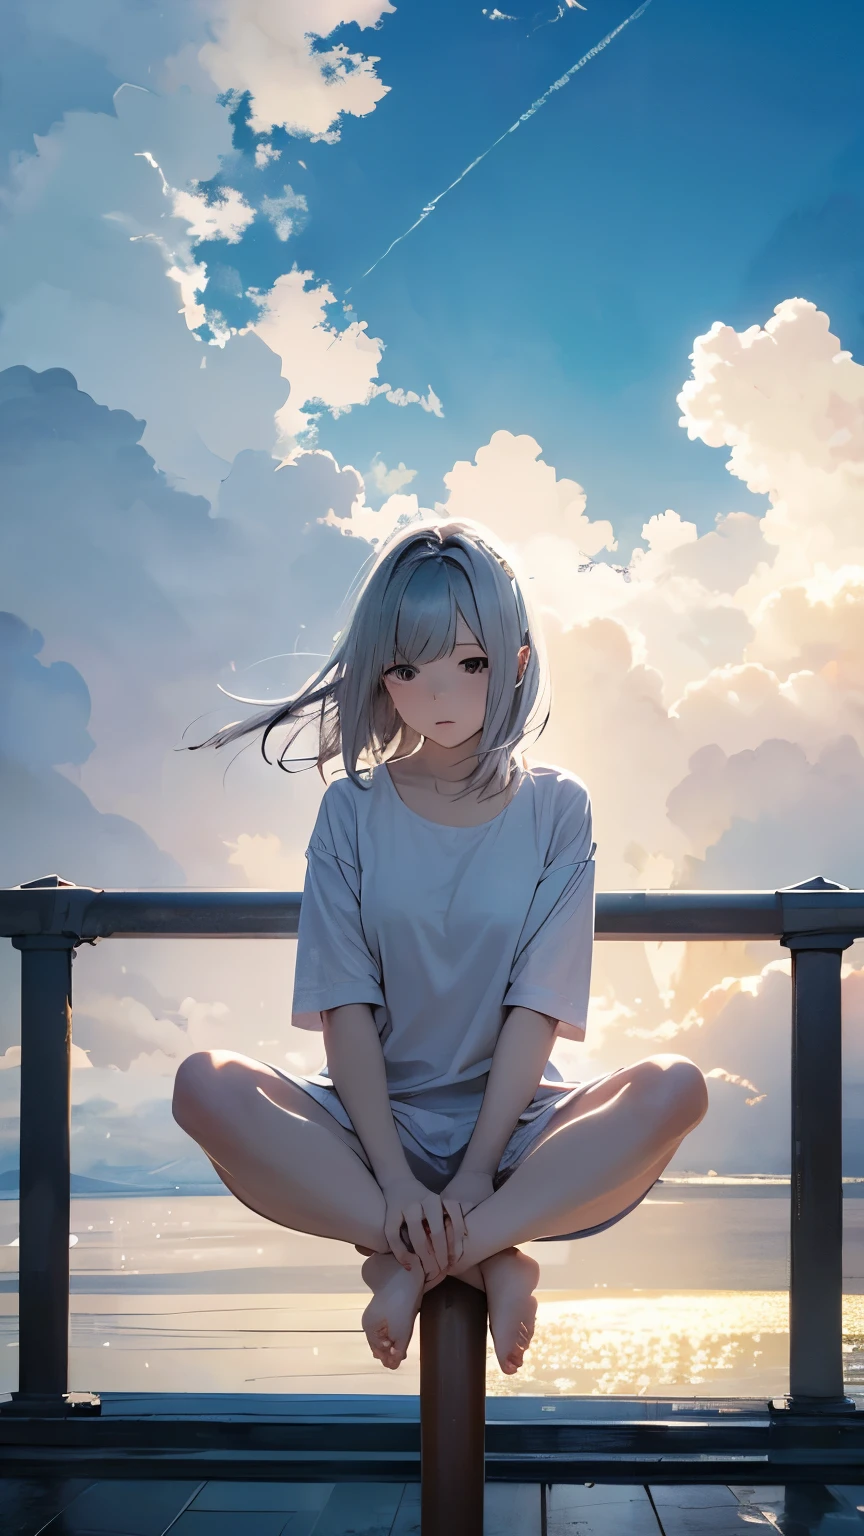 One Girl、Highest quality、masterpiece、Perfect Anatomy、Girl sitting on a pillar、A thin pillar stretching high into the sky、Mysterious cylindrical pillar、Height 3000ｍ、sea of clouds、blue sky、Sitting cross-legged、Hair blowing in the wind、Gray Hair、Girl staring into the distance、White clothes、barefoot、Full body angle、sea of clouds